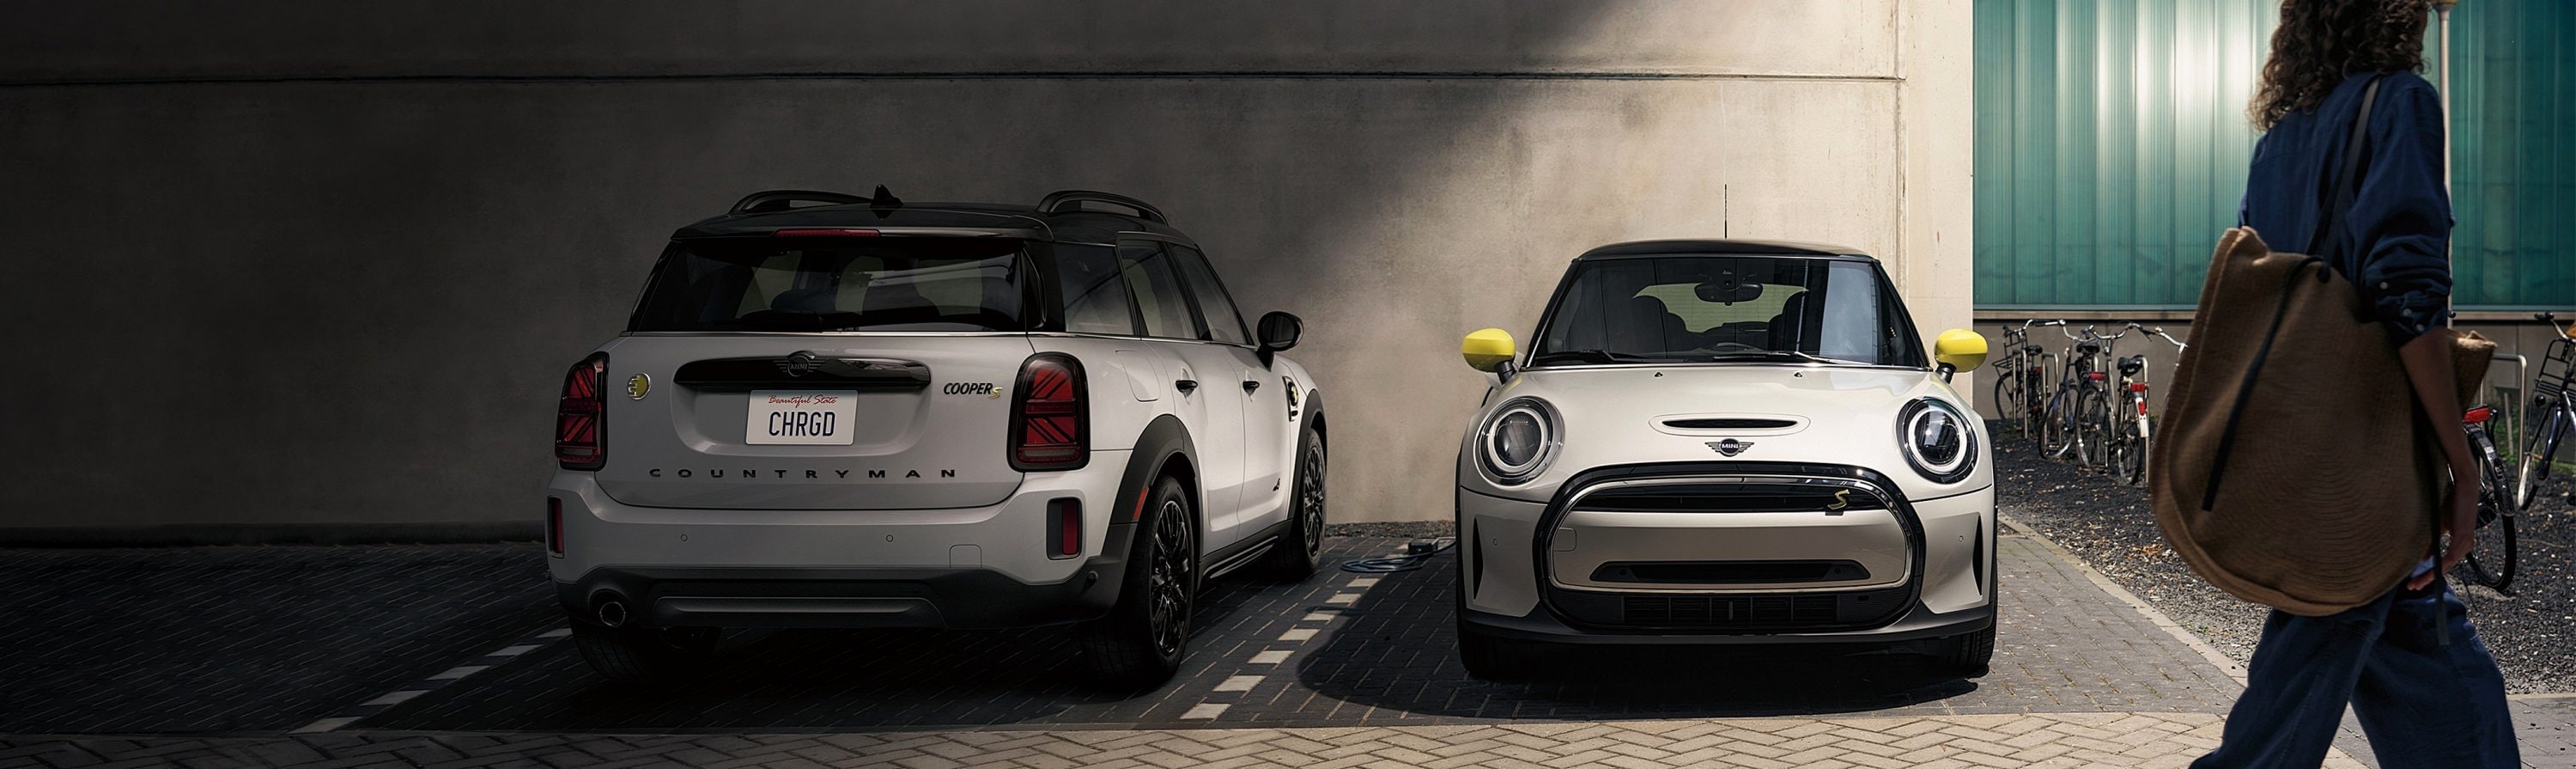 Two MINI vehicles, one back view of a MINI Countryman with an overcast shadow and one front view of a MINI Countryman, parked in designated parking spots on a cobblestone surface outside a building with a woman walking past on the right side.